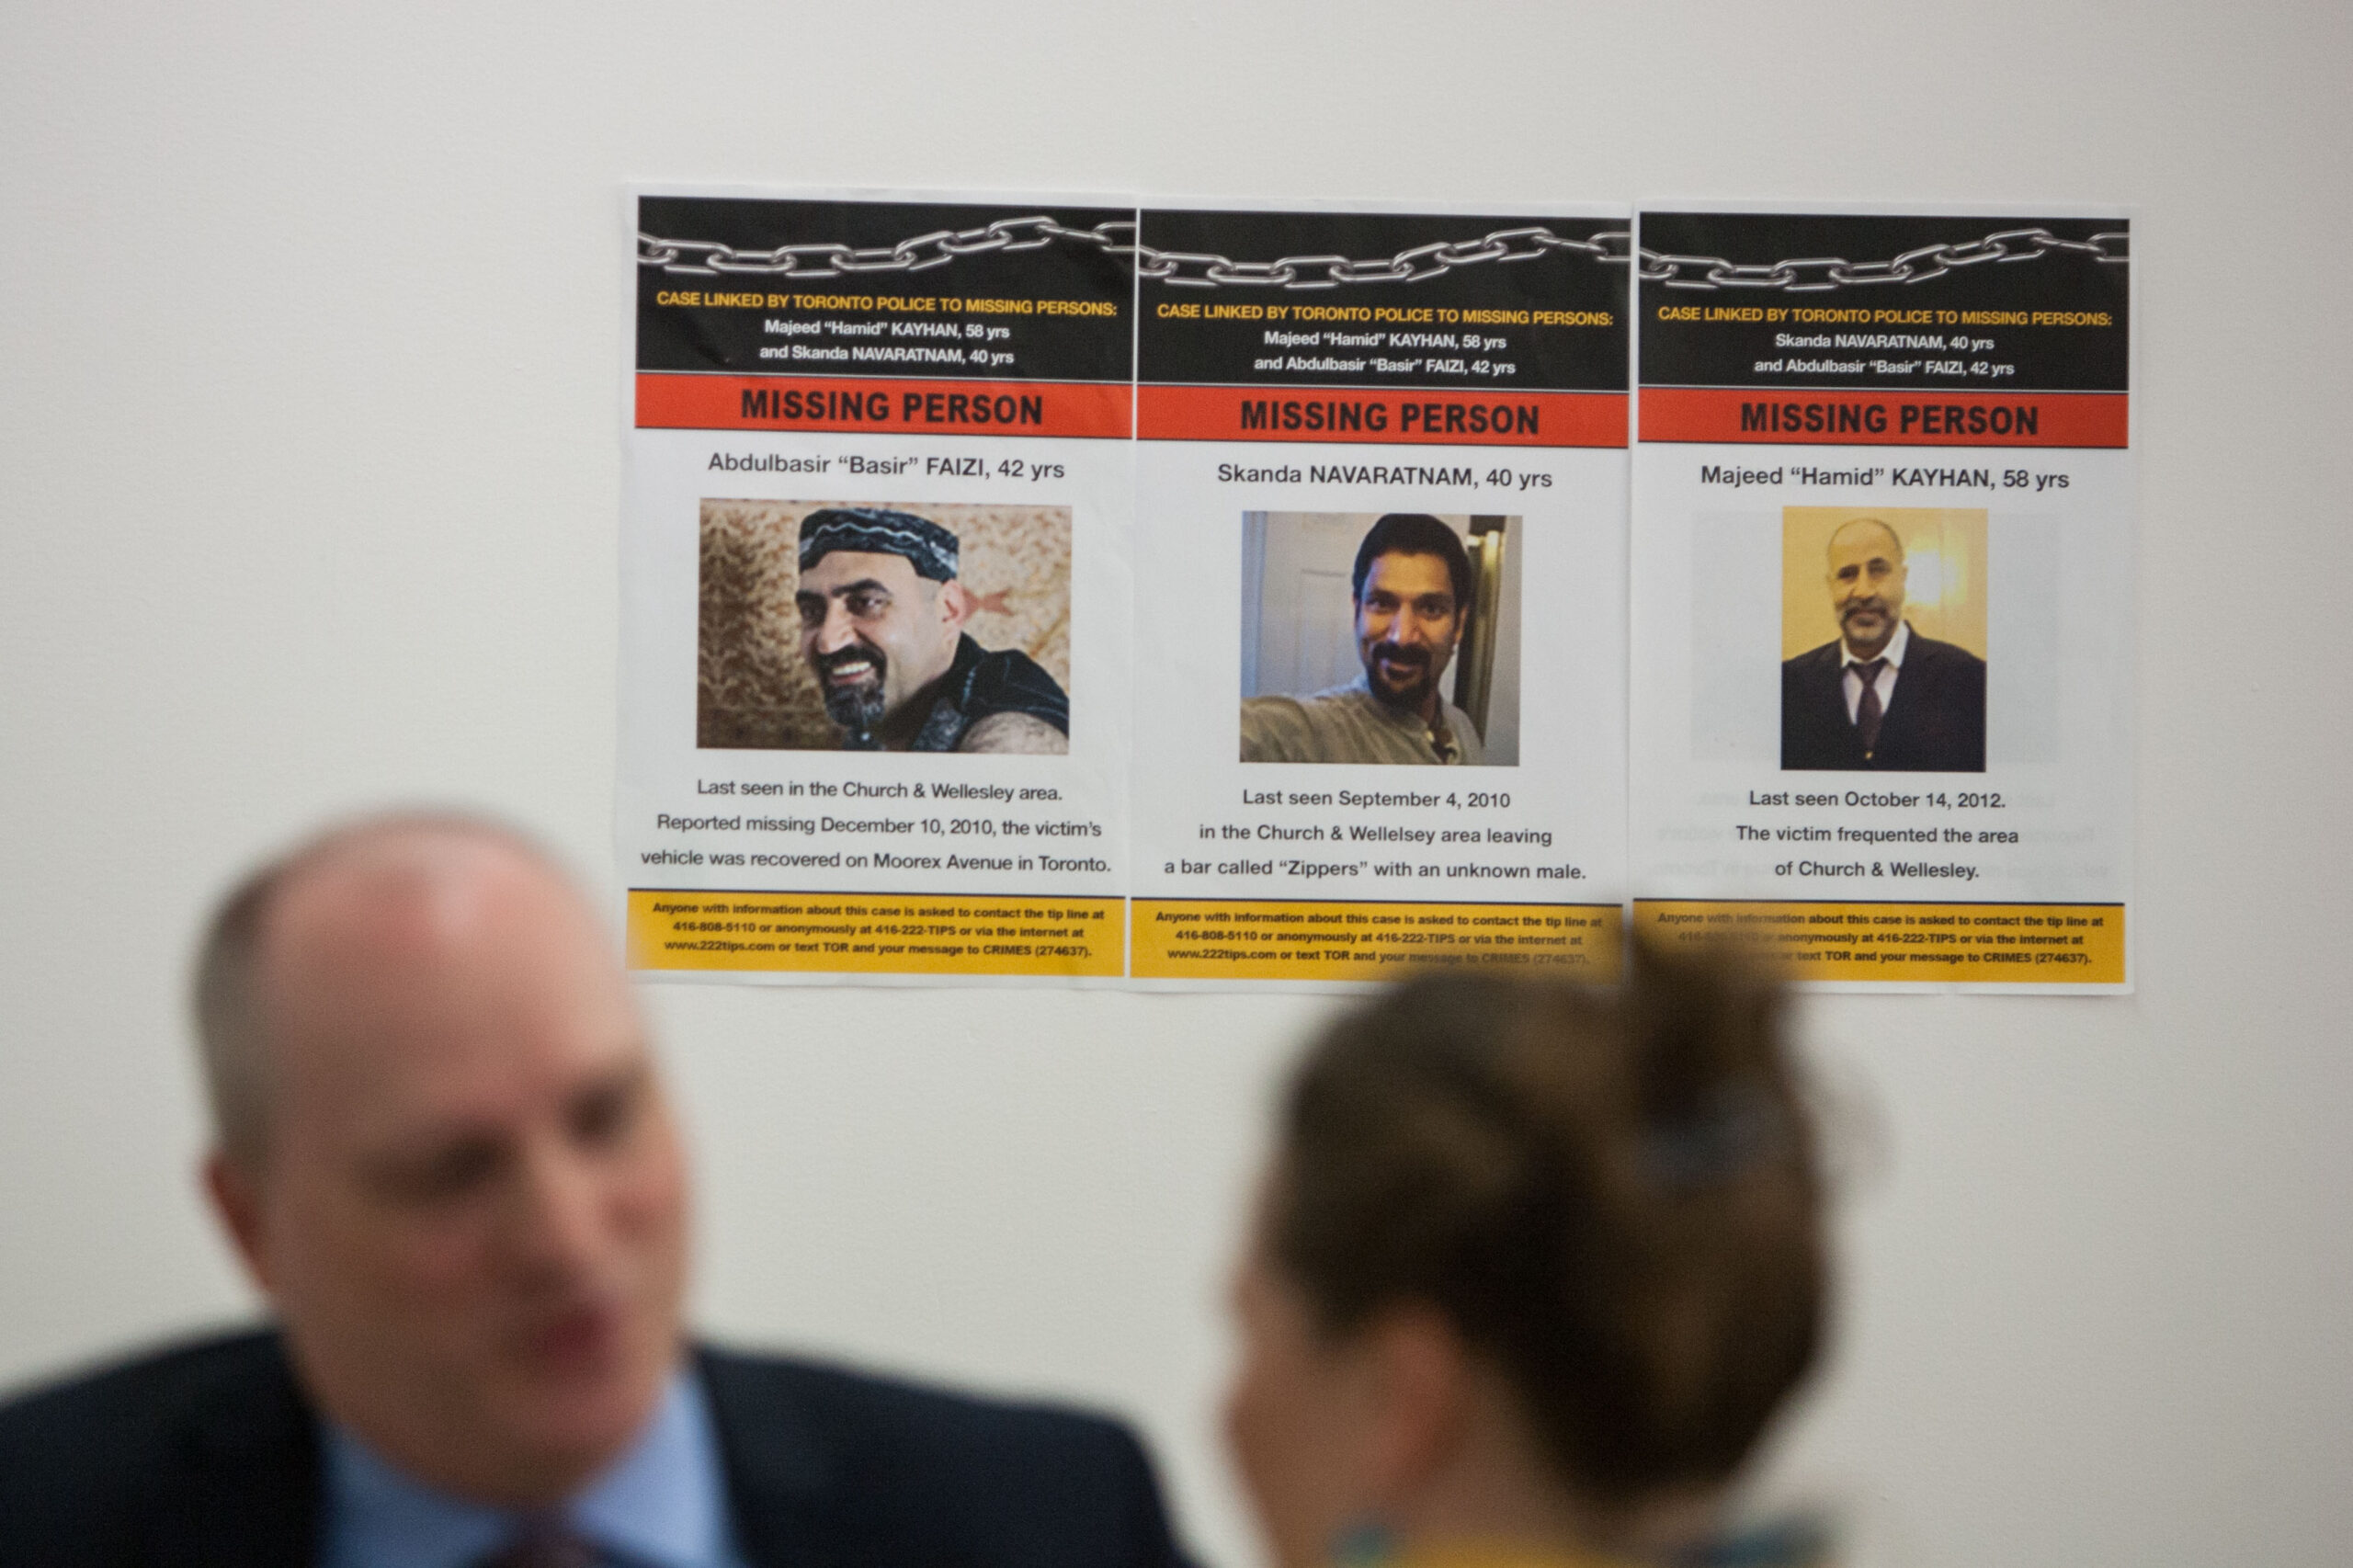 Posters of missing men Abdulbasir Faizi, Skandaraj Navaratnam, and Majeed Kayhan were taped to the wall at the town hall meeting at The 519 to discuss the disappearance missing LGBT people including Andrew Kinsman and Selim Essen on Aug 1, 2017.